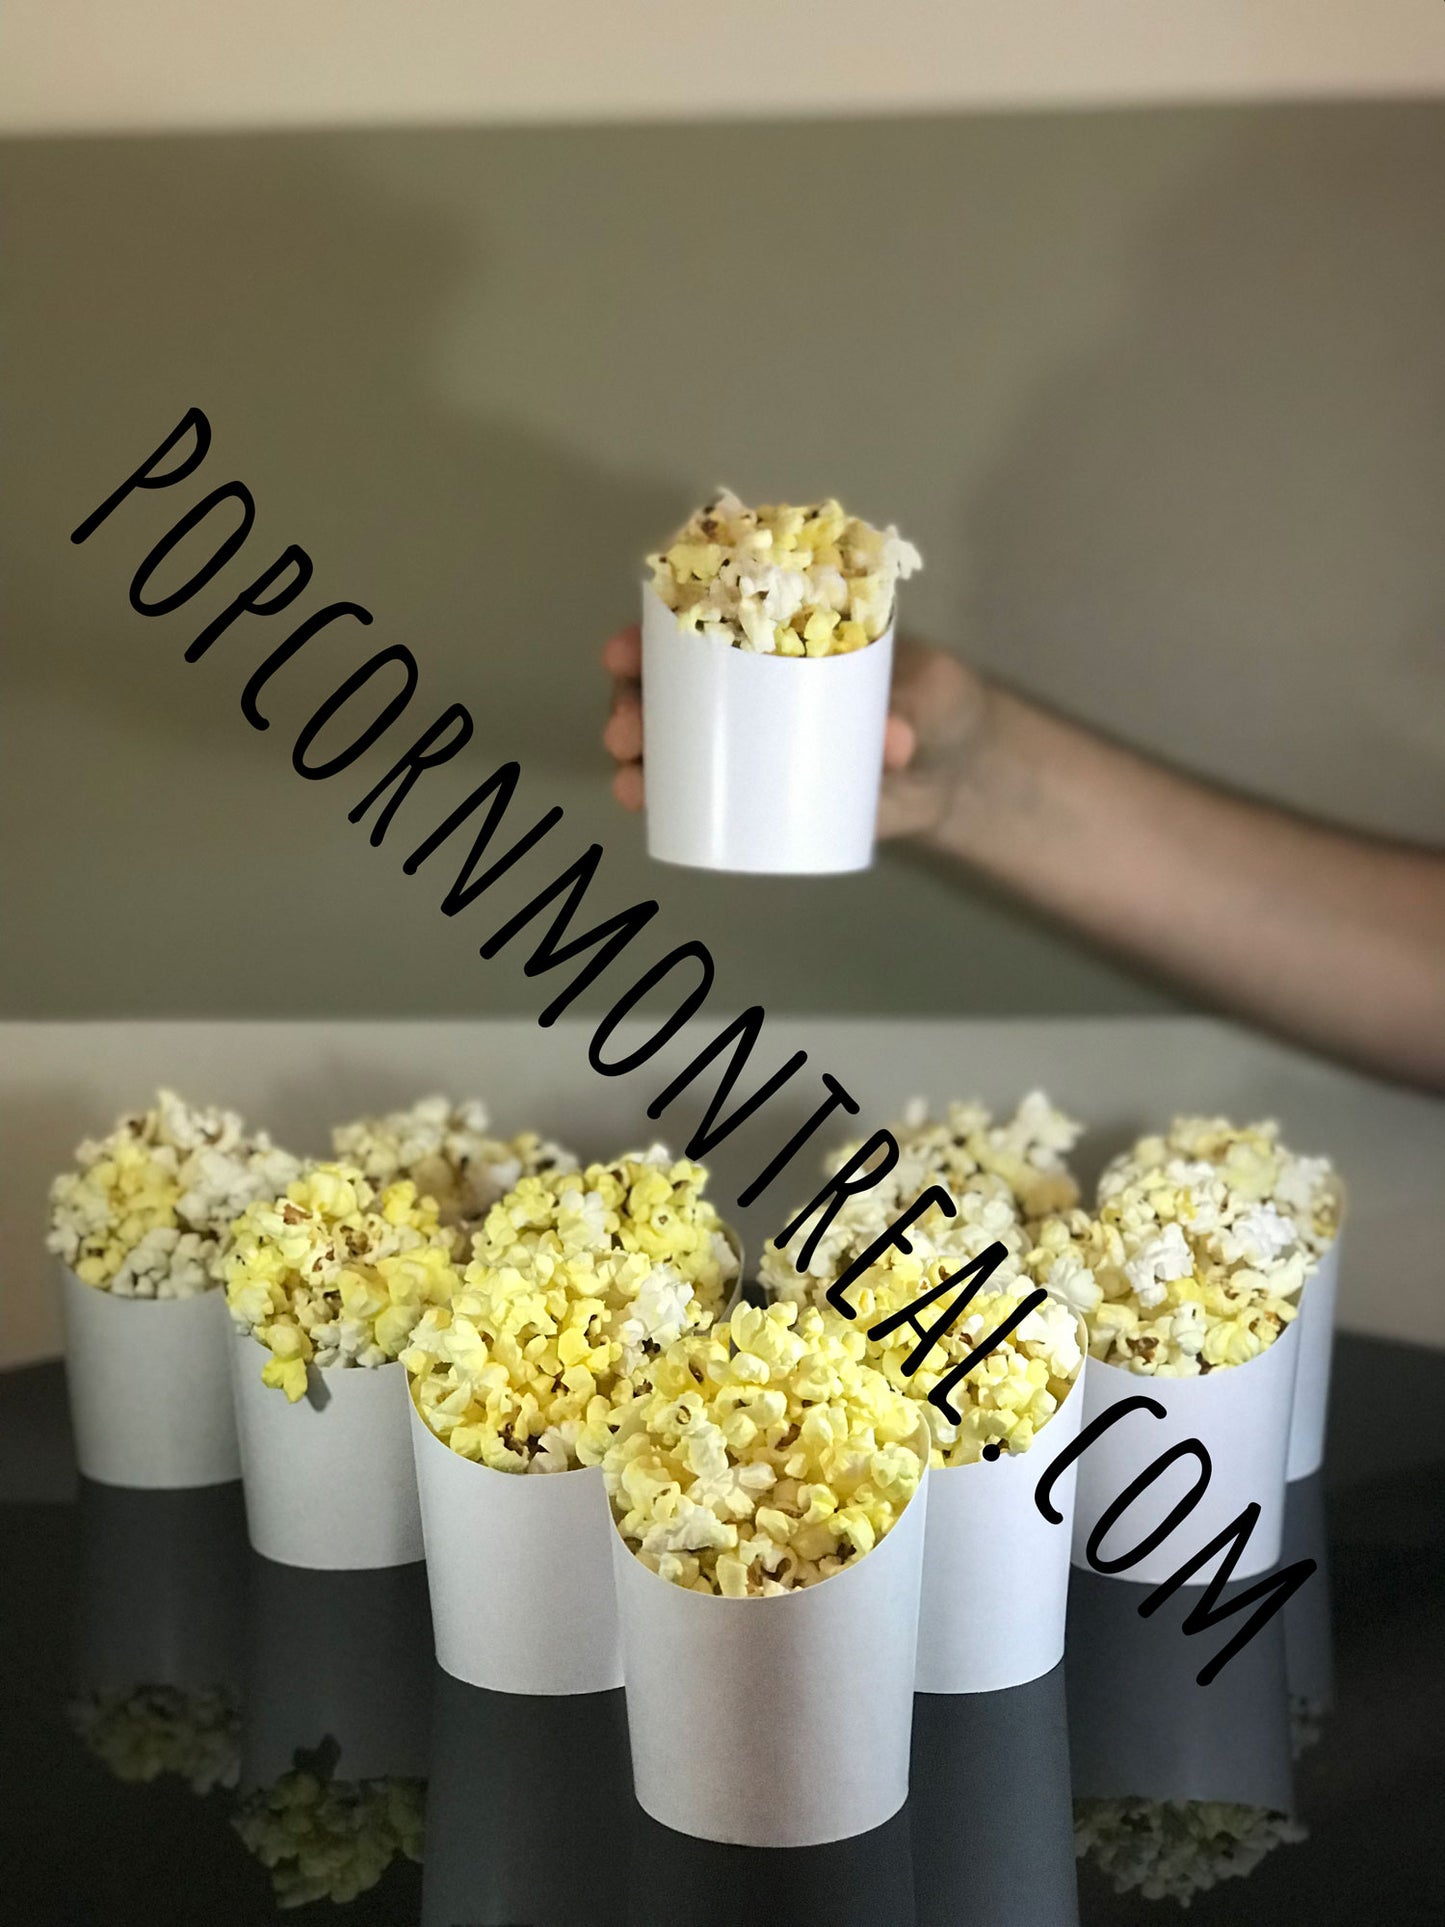 Popcorn portions (corn kernel with oil/butter flavor and serving cups)